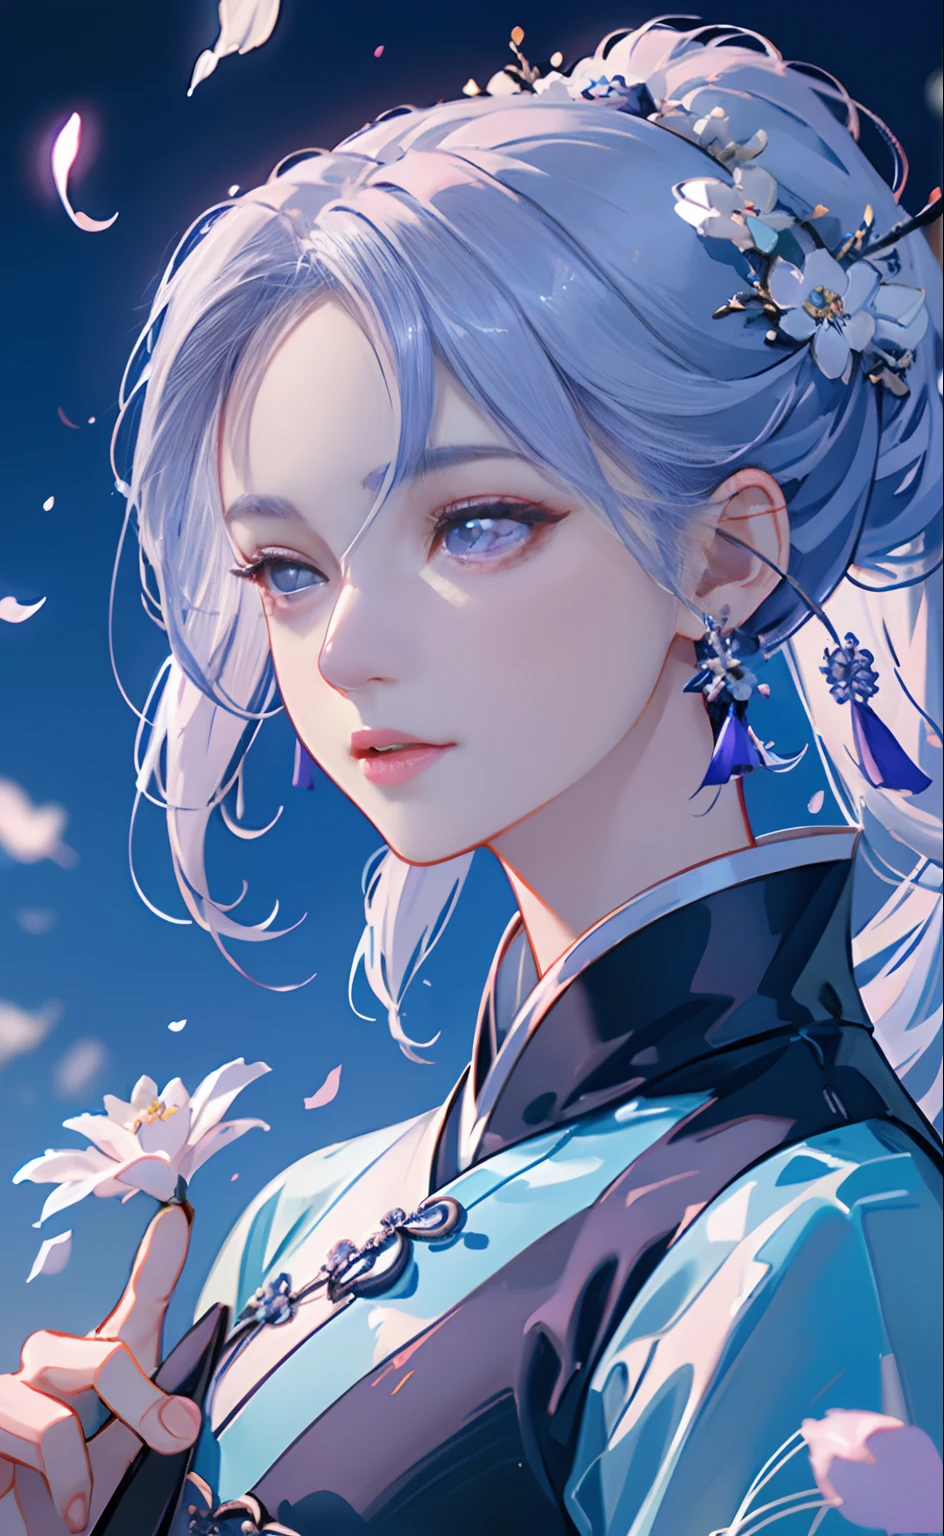 Mature girl, purple eyes, blue-white hair color, floating hair, delicate and flexible eyes, intricate damask hanfu, gorgeous accessories, wearing pearl earrings, fov, f/1.8, masterpiece, ancient Chinese architecture, blue sky, flower petals flying, front portrait shot, Chang'e, side lighting, sunlight on people, 8K